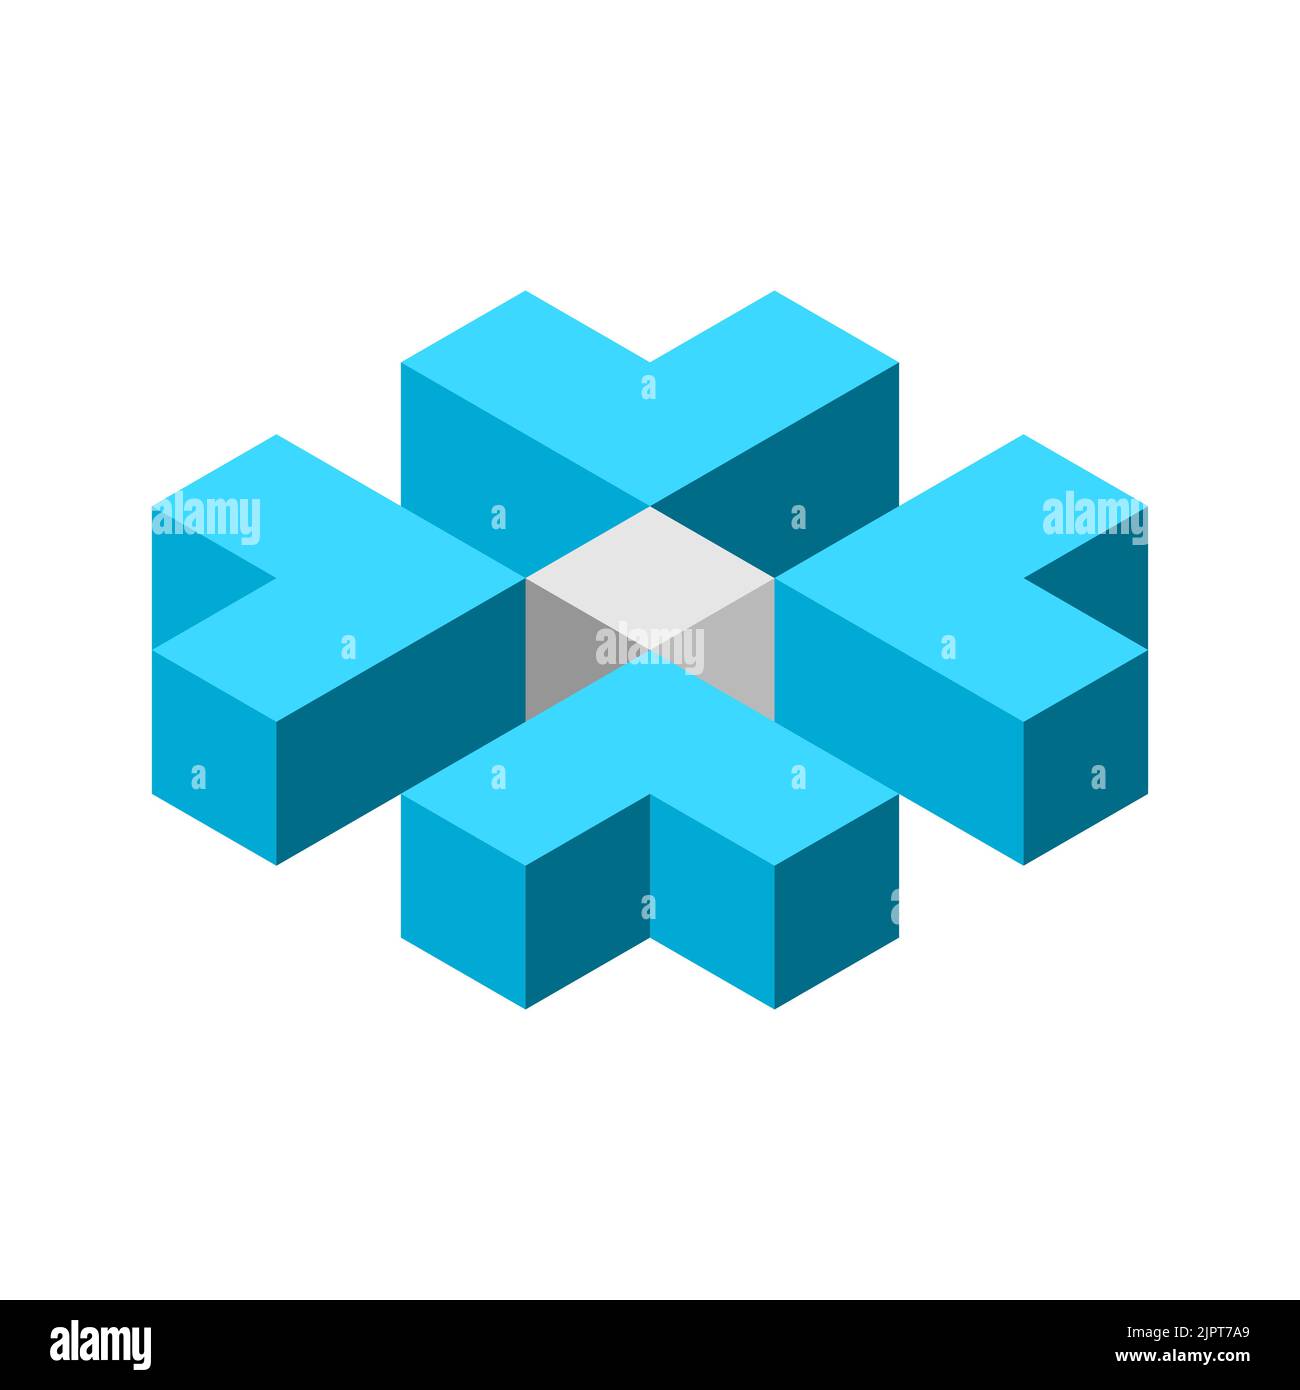 Four arrows pointing to the same spot. Reaching a goal concept. Abstract geometric cubical concept. Arrowheads made of cubes. Hit central target. Stock Vector